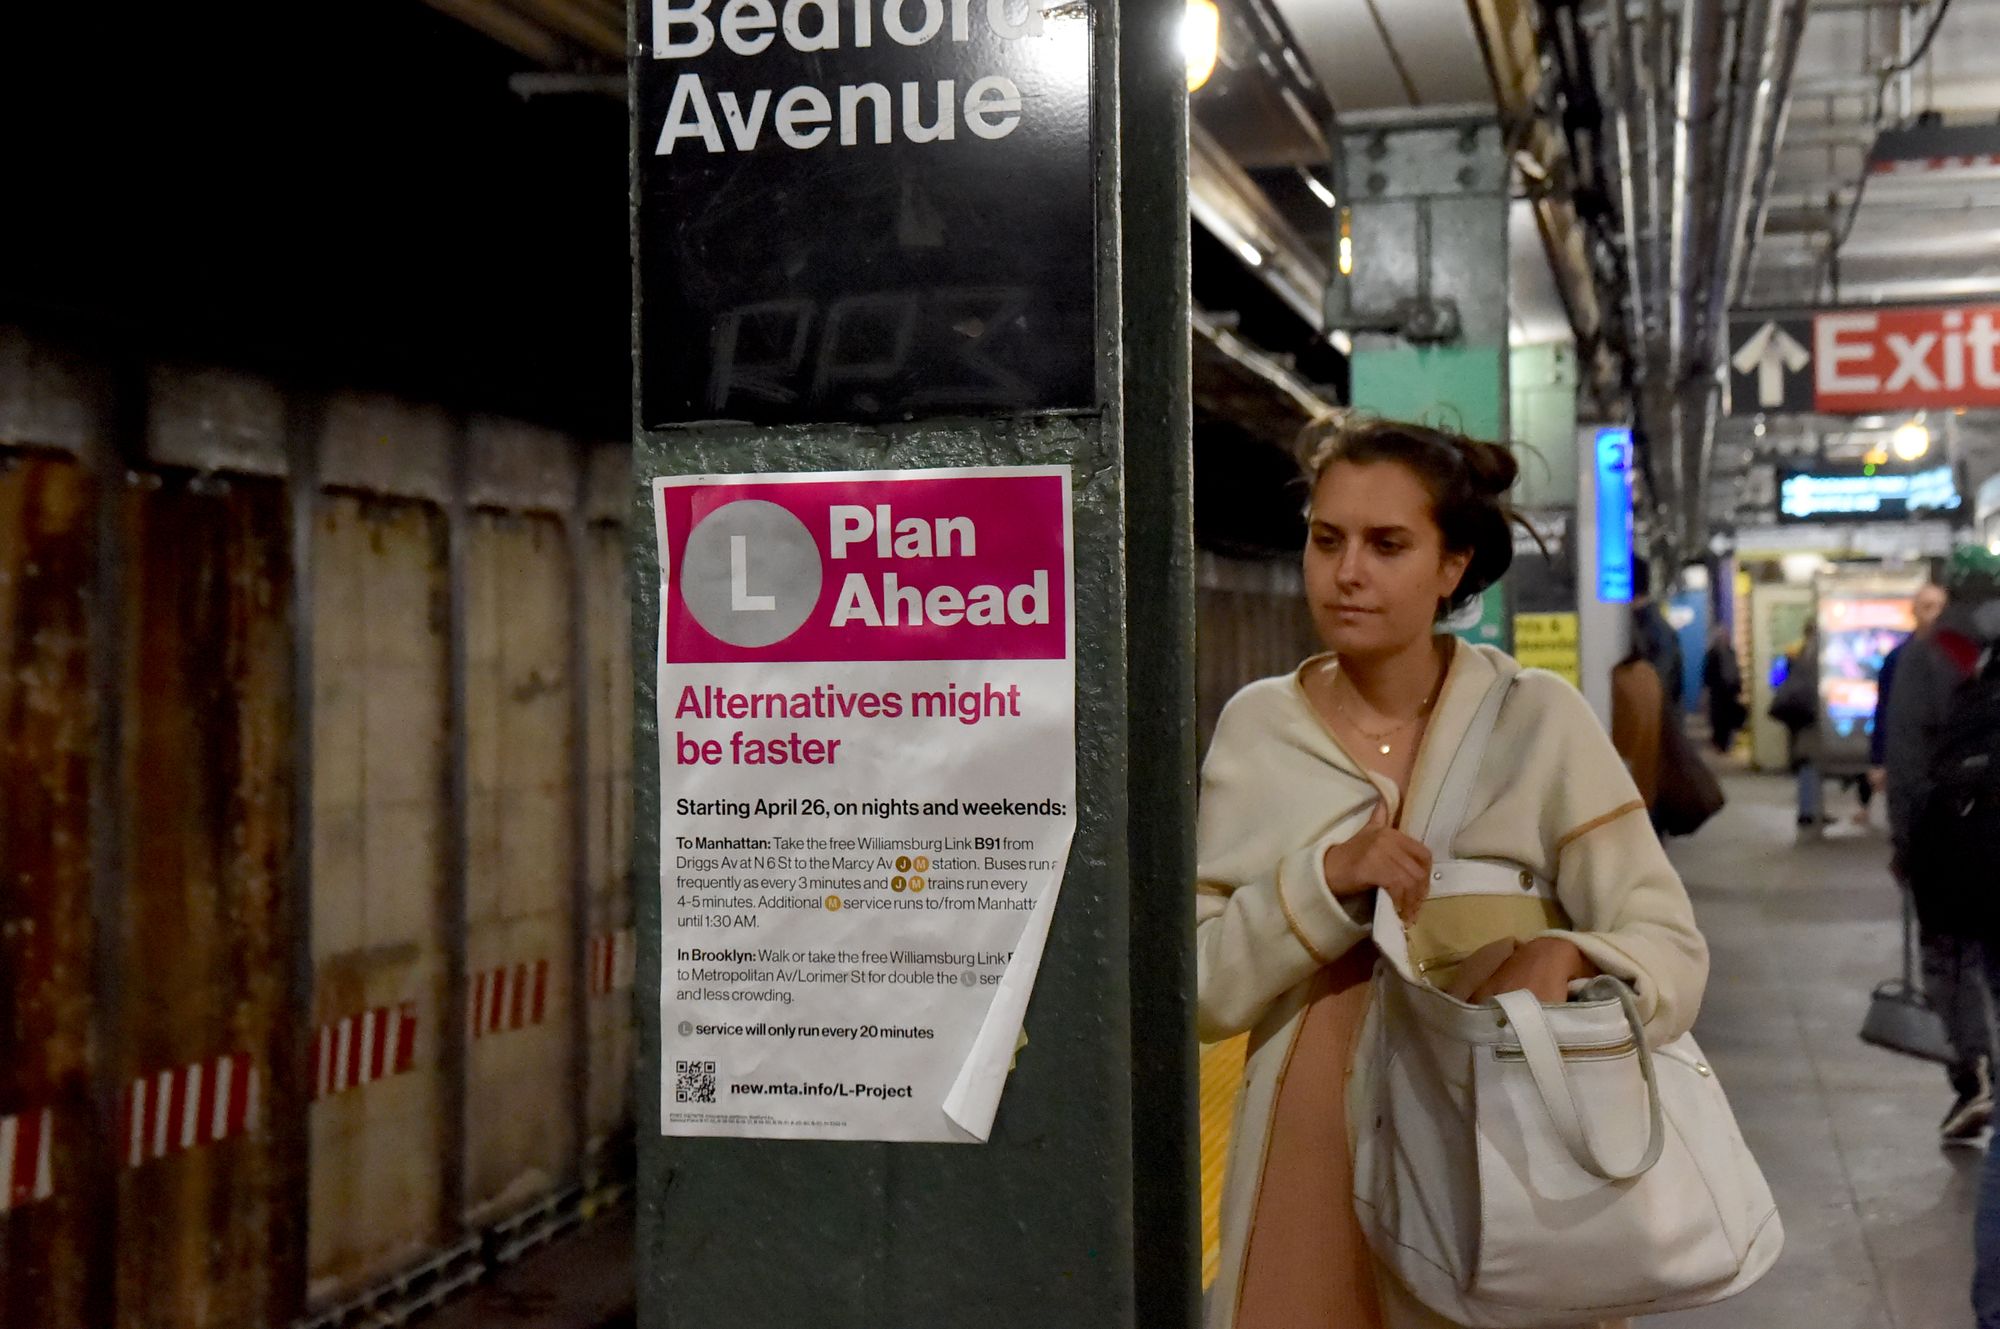 Briefly Noted: L Train Work Begins, Two-Way Tolls On Verrazzano Proposed & More